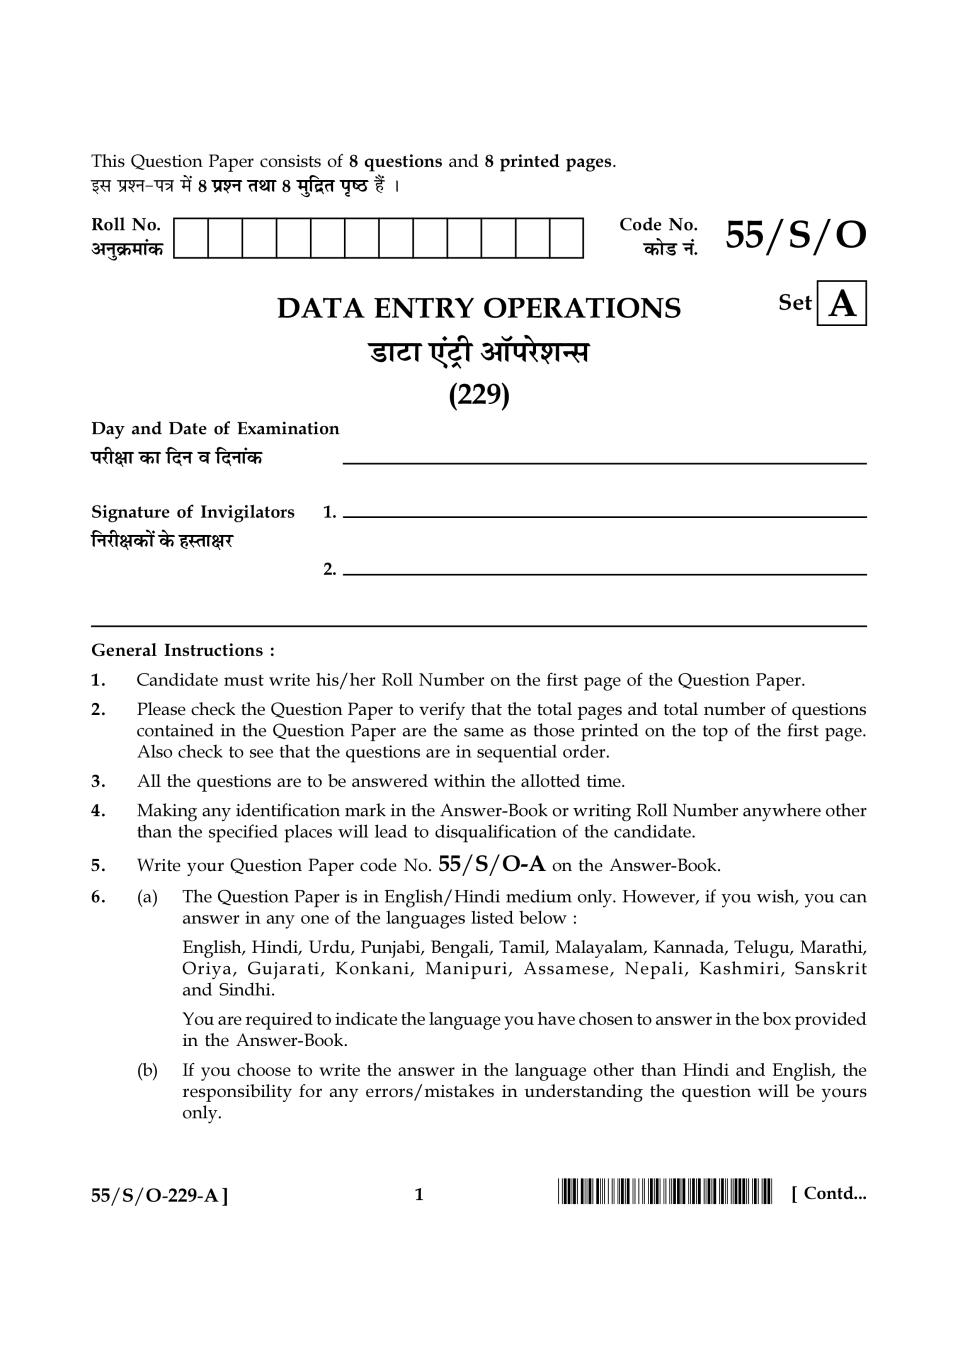 NIOS Class 10 Question Paper Oct 2017 - Data Entry Operations - Page 1